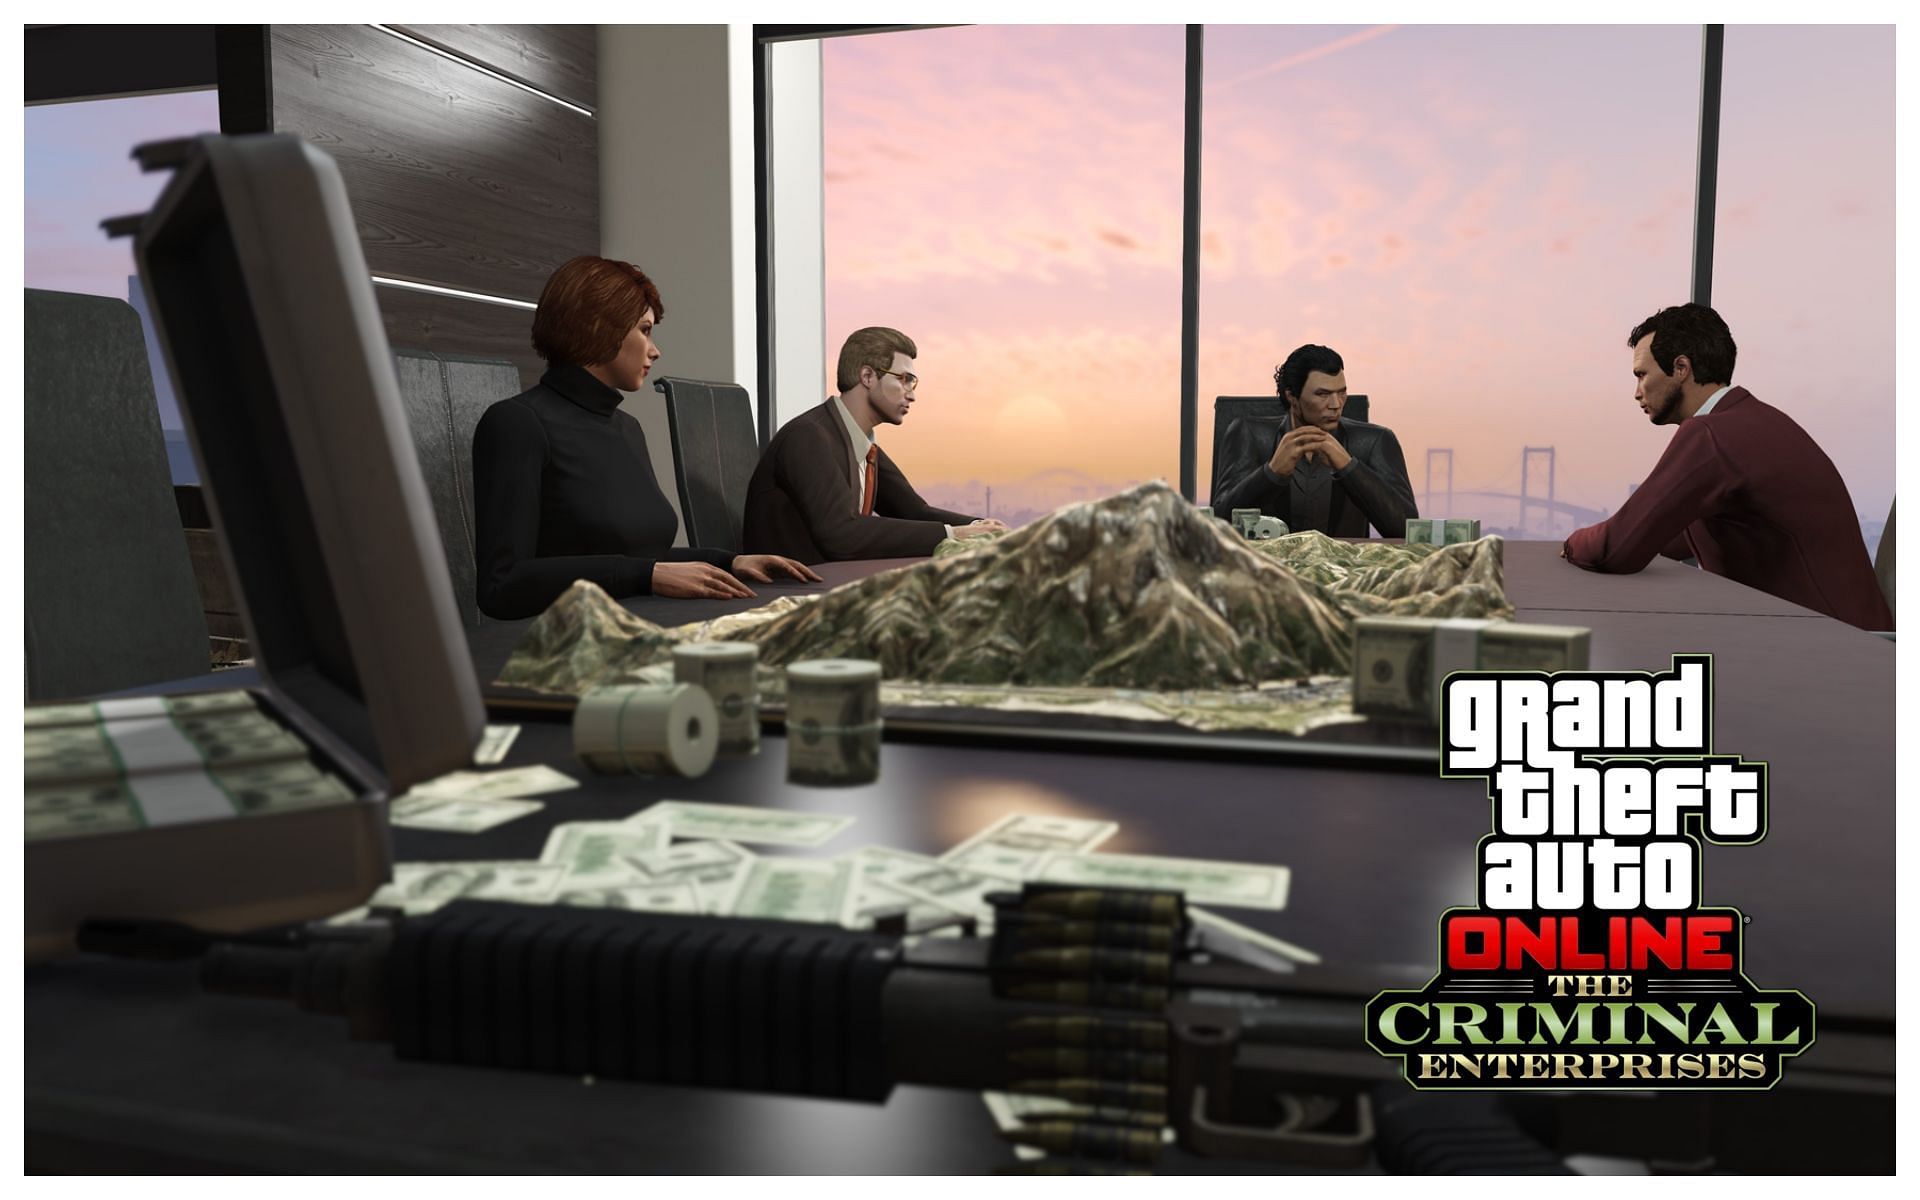 There are many things players can do while being a CEO (Images via Rockstar Games)